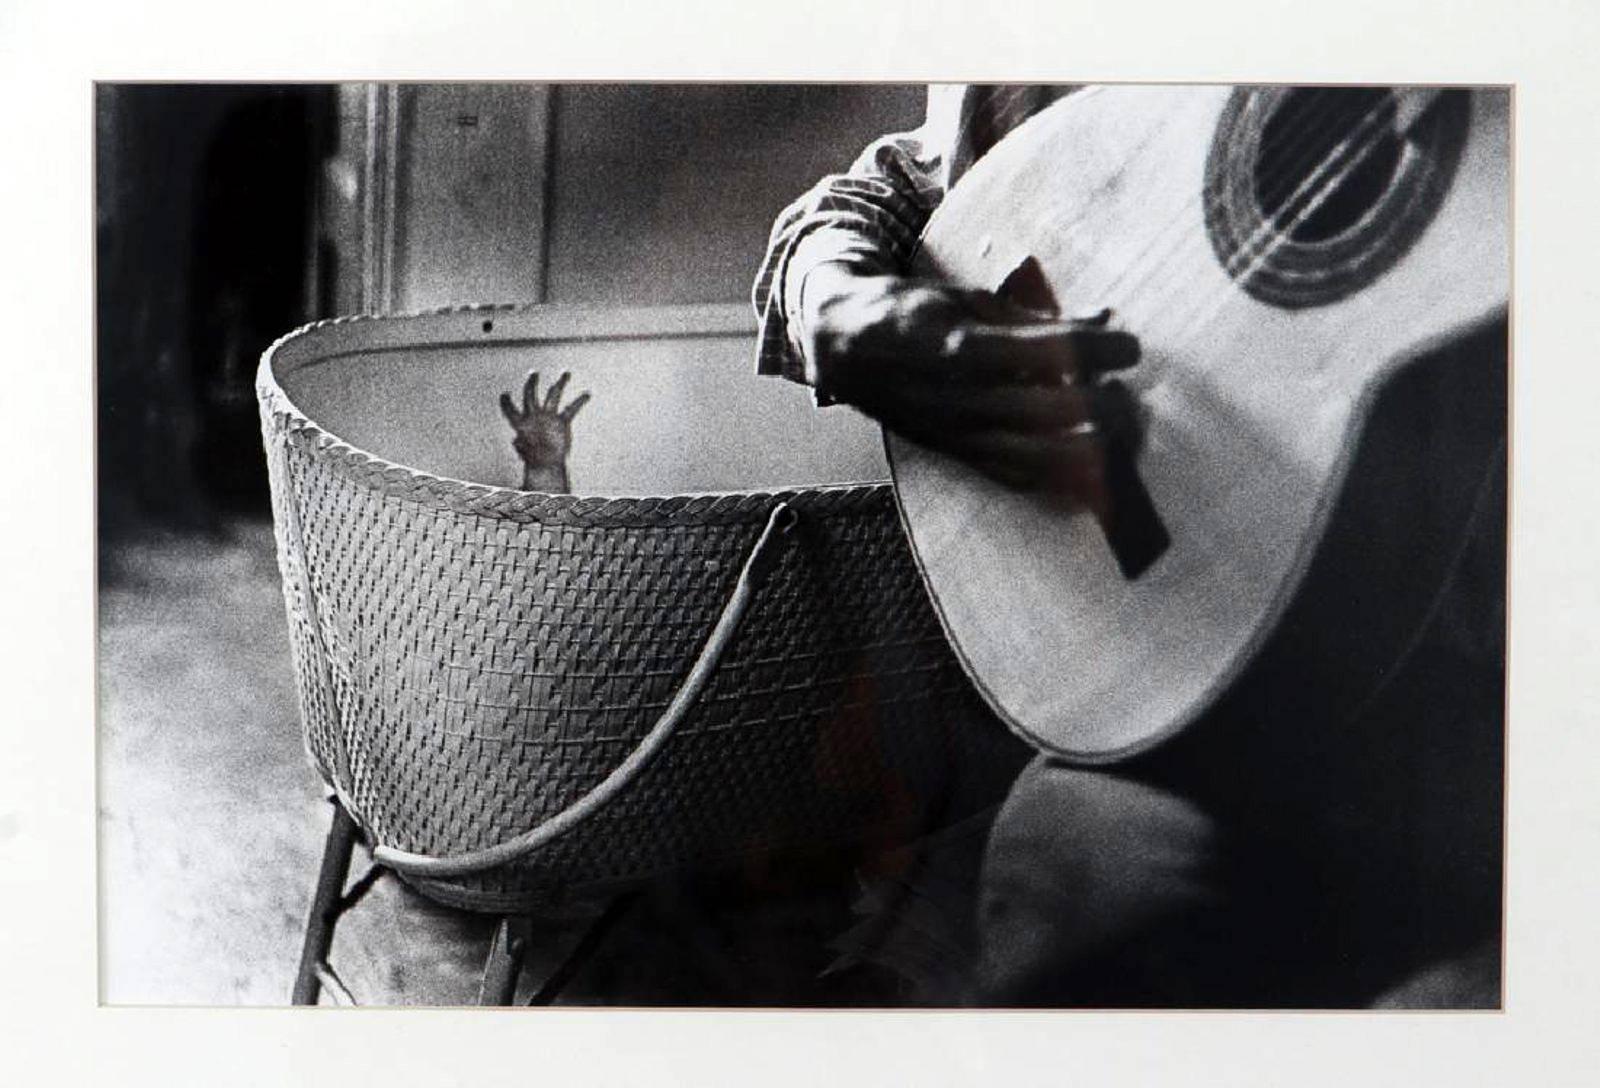 A vintage gelatin silver black and white print by American photographer Gibson Ralph (born 1939, Los Angeles, CA),
Untitled [Guitar Player & Bassinet]
Dated 1961, 7 of an edition of 25
Gelatin silver print
Measures: 8 x 12.25 inches (sight